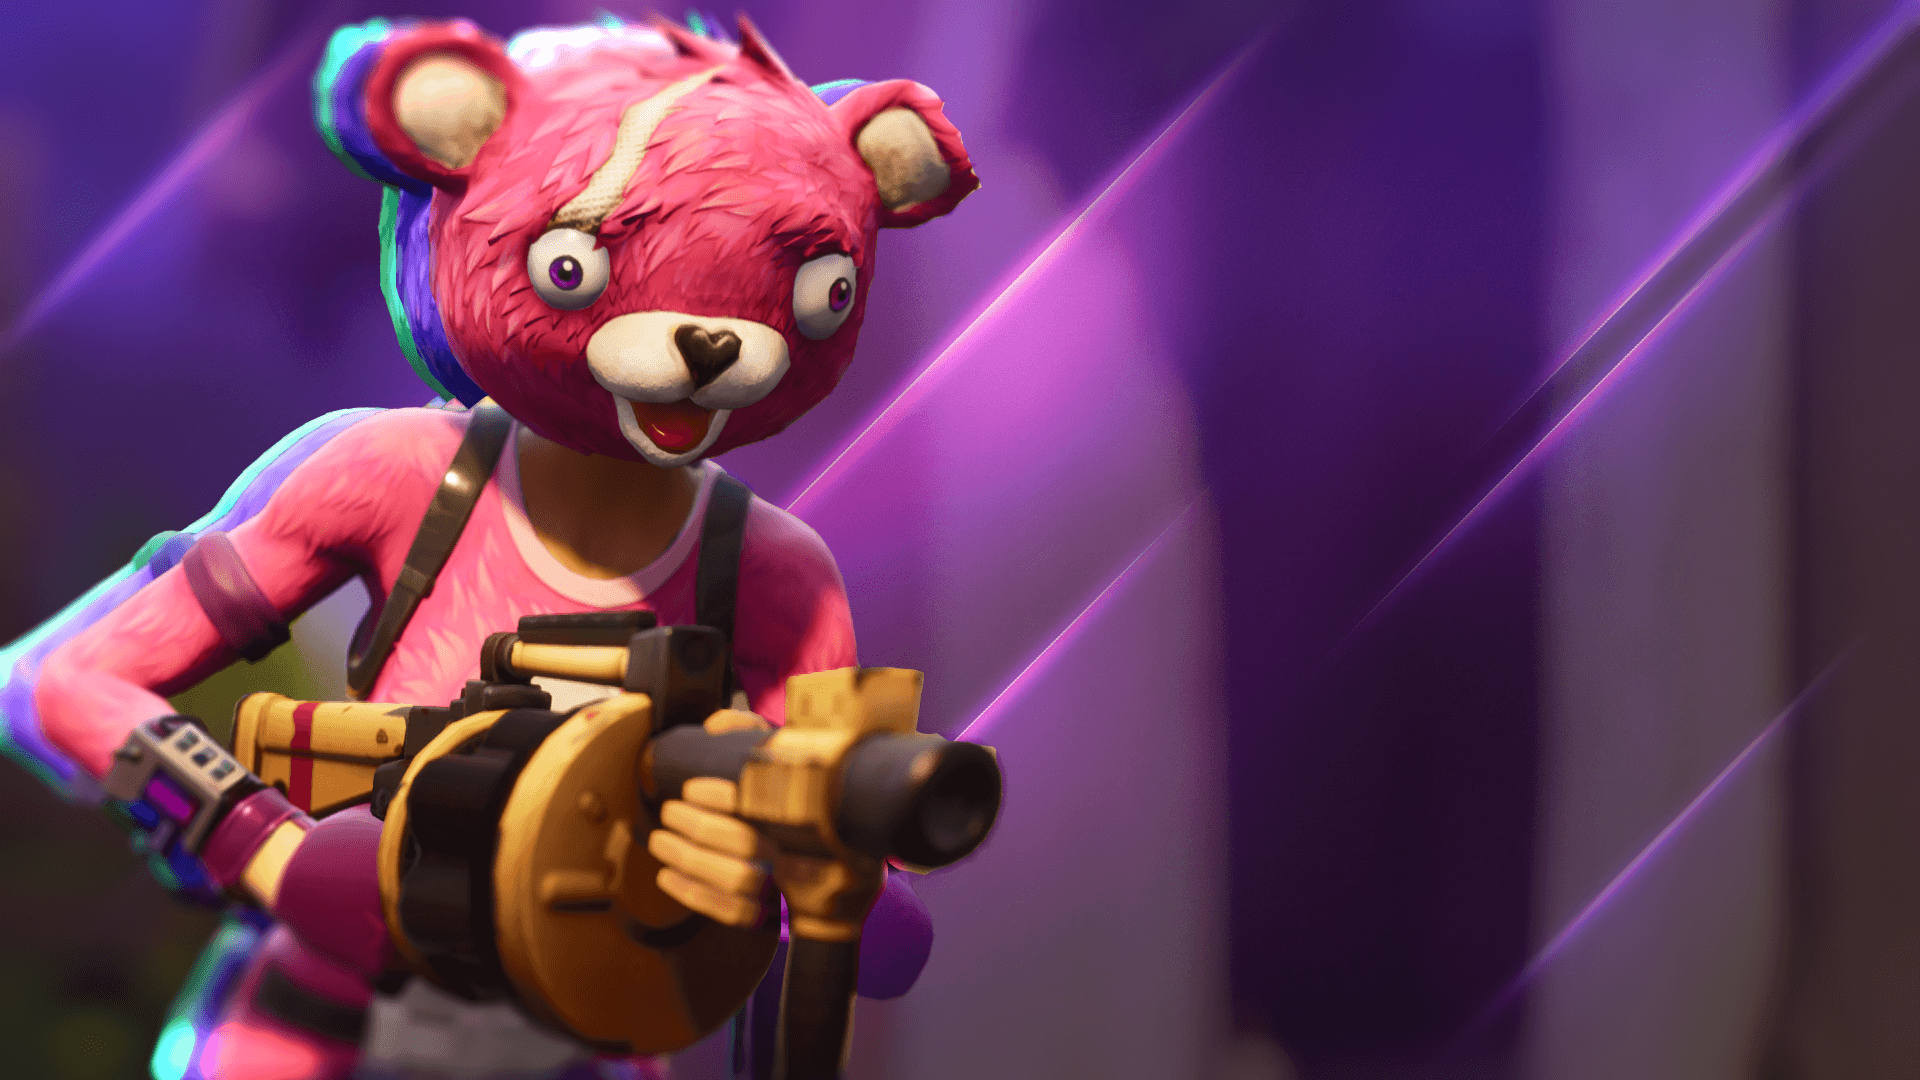 I made this background of the cuddle team leader! 1920x1080